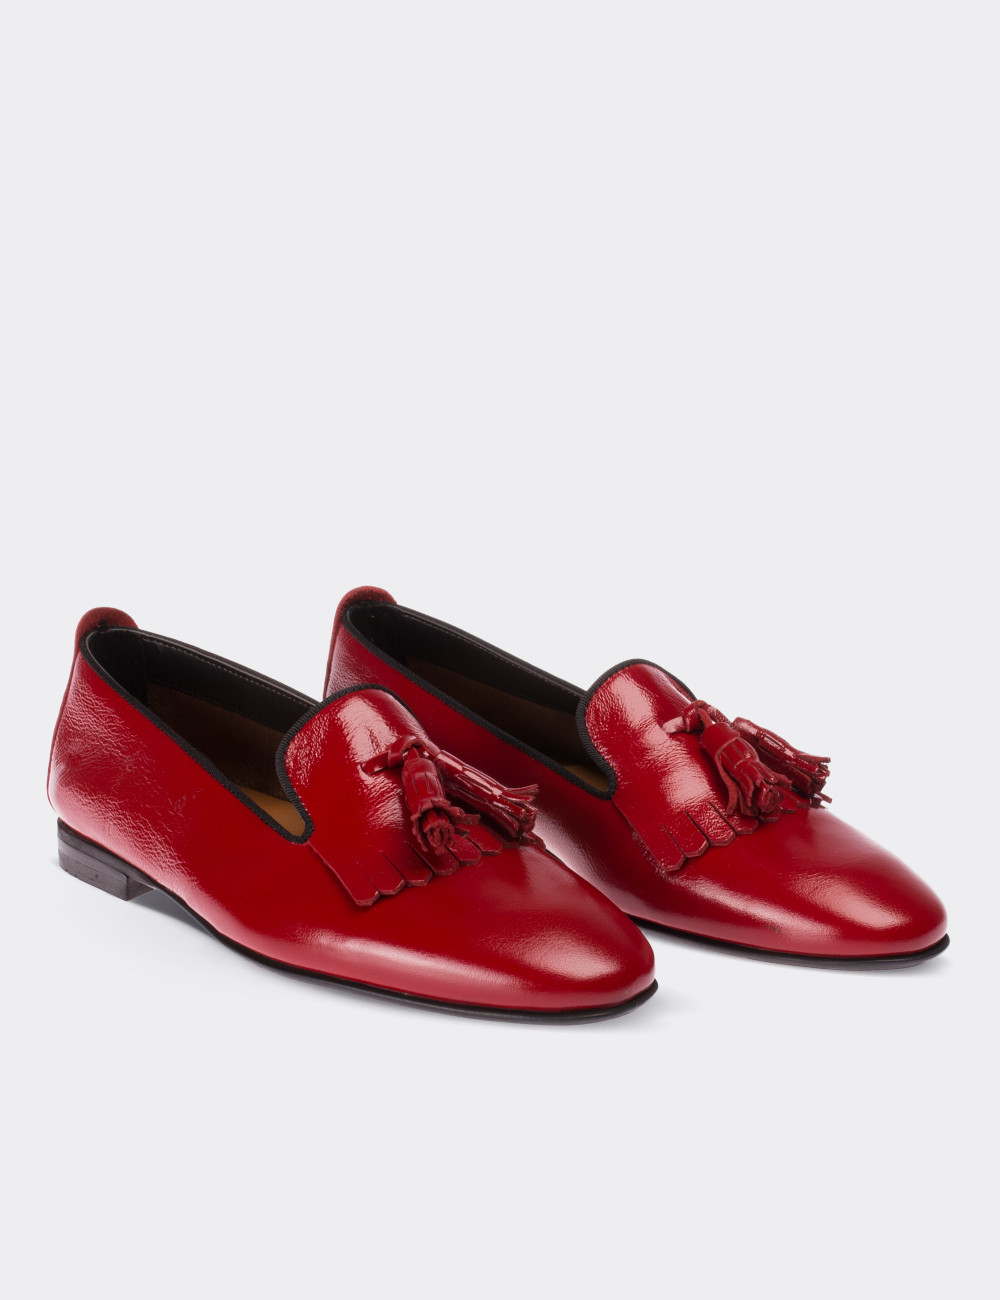 Red Patent Leather Loafers - 01612ZKRMM02